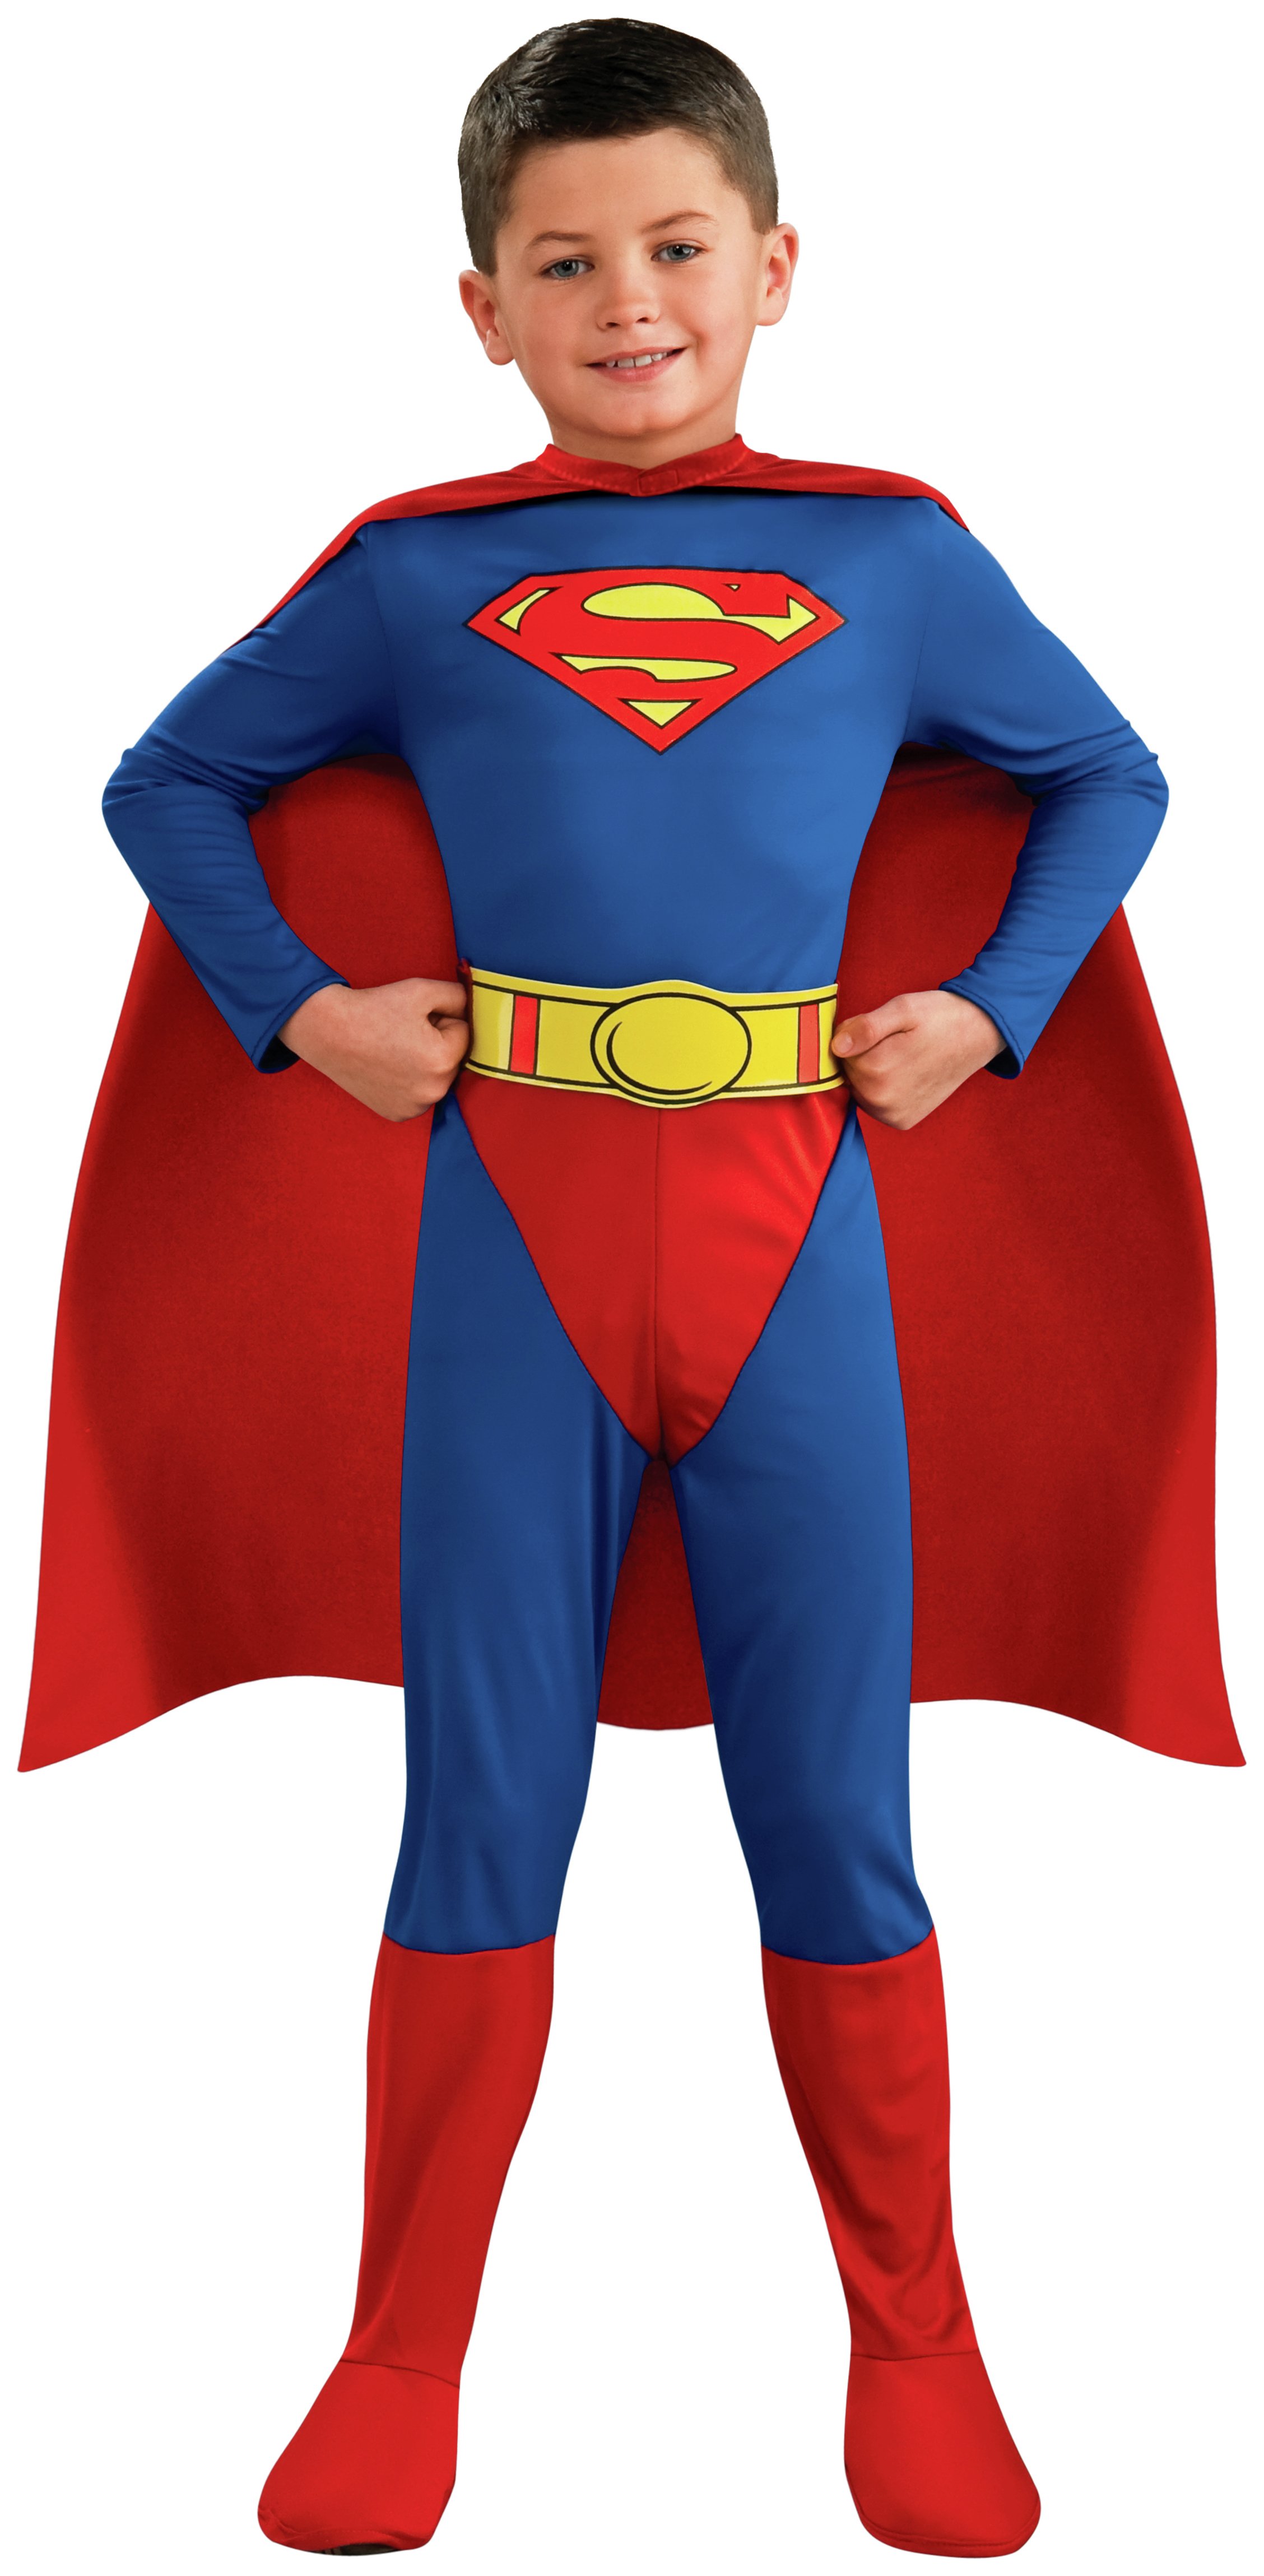 Superman - Dress Up Outfit - 3-4 Years Review